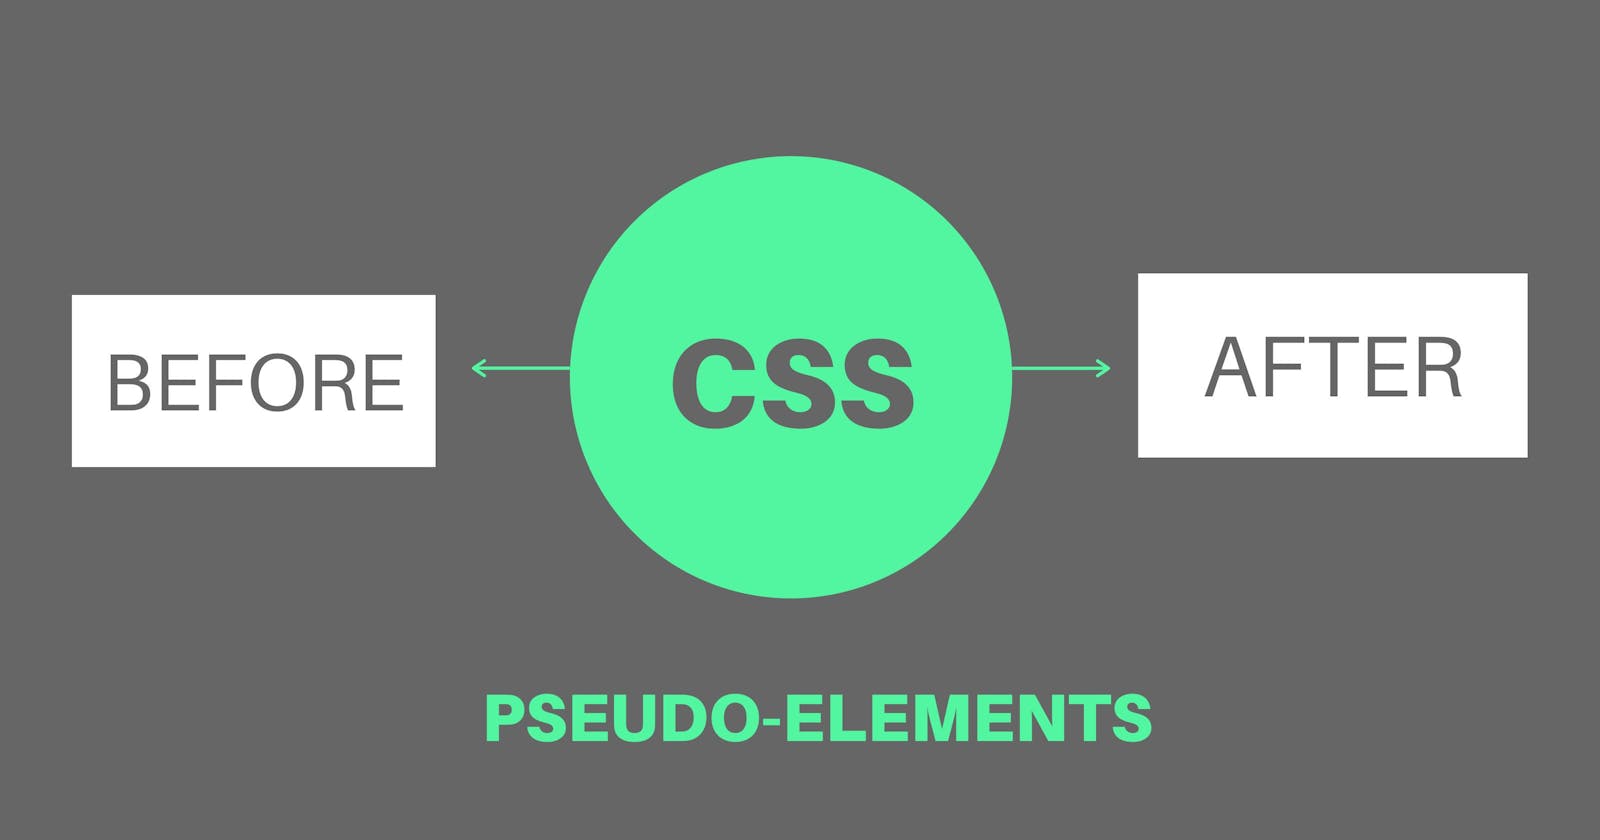 CSS Before and After Pseudo-Elements Explicitly Explained